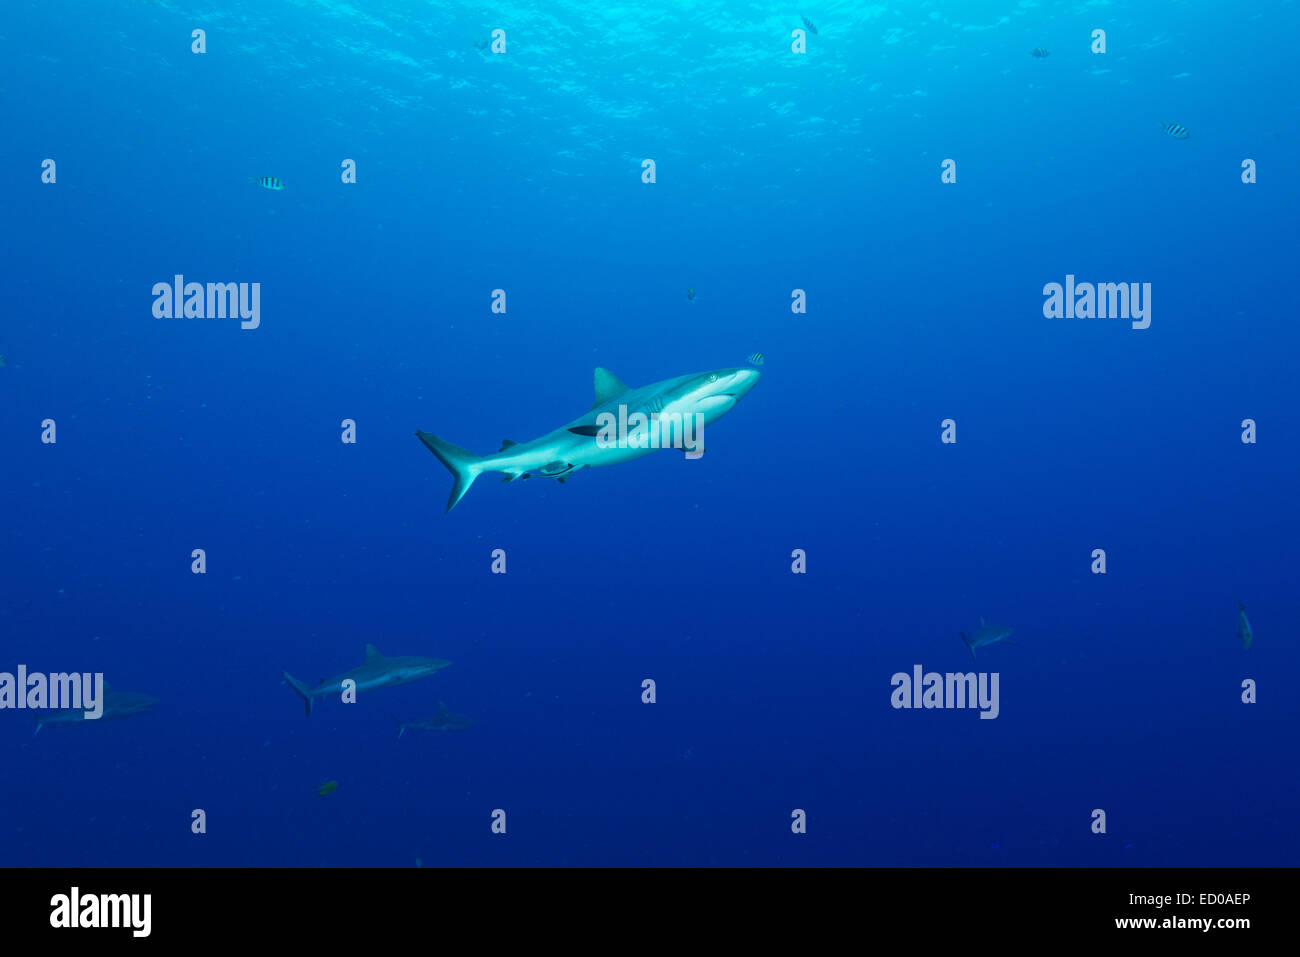 Sharks in deep blue. at Yap island, Federated States of Micronesia Stock Photo